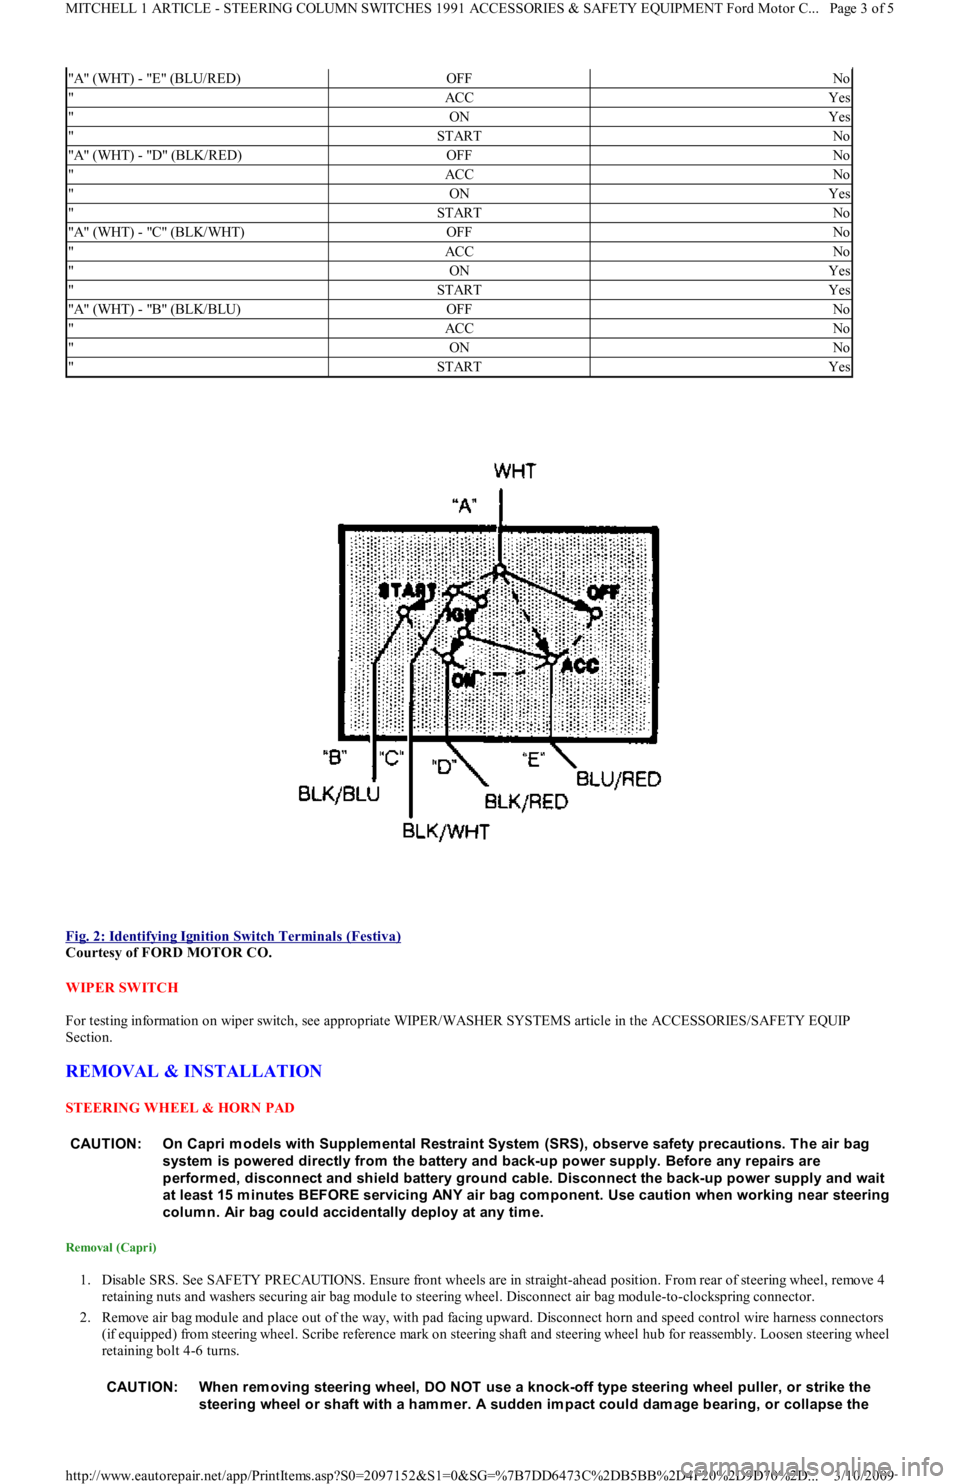 FORD FESTIVA 1991 User Guide  
Fig. 2: Identifying Ignition Switch Terminals (Festiva)
 
Courtesy of FORD MOTOR CO. 
WIPER SWITCH 
For testing information on wiper switch, see appropriate WIPER/WASHER SYSTEMS article in the ACCES